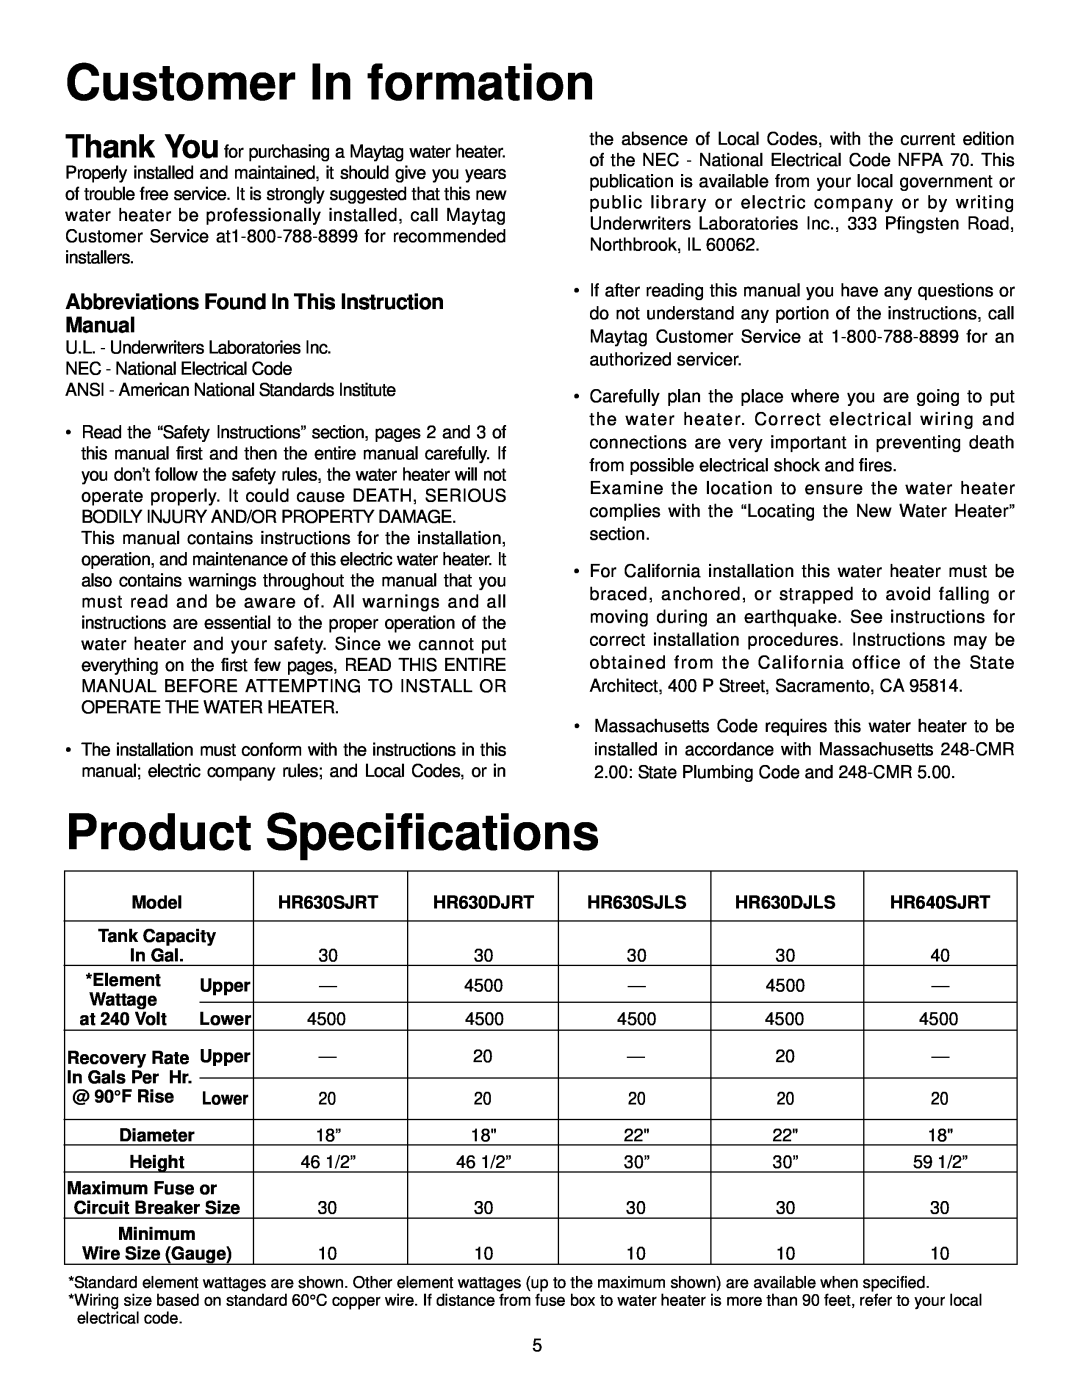 Maytag HR682DJRT, HR652SJRT, HR682SJRT, HR666DJRT, HR652DJRT, HR666SJRT manual Customer In formation, Product Specifications 